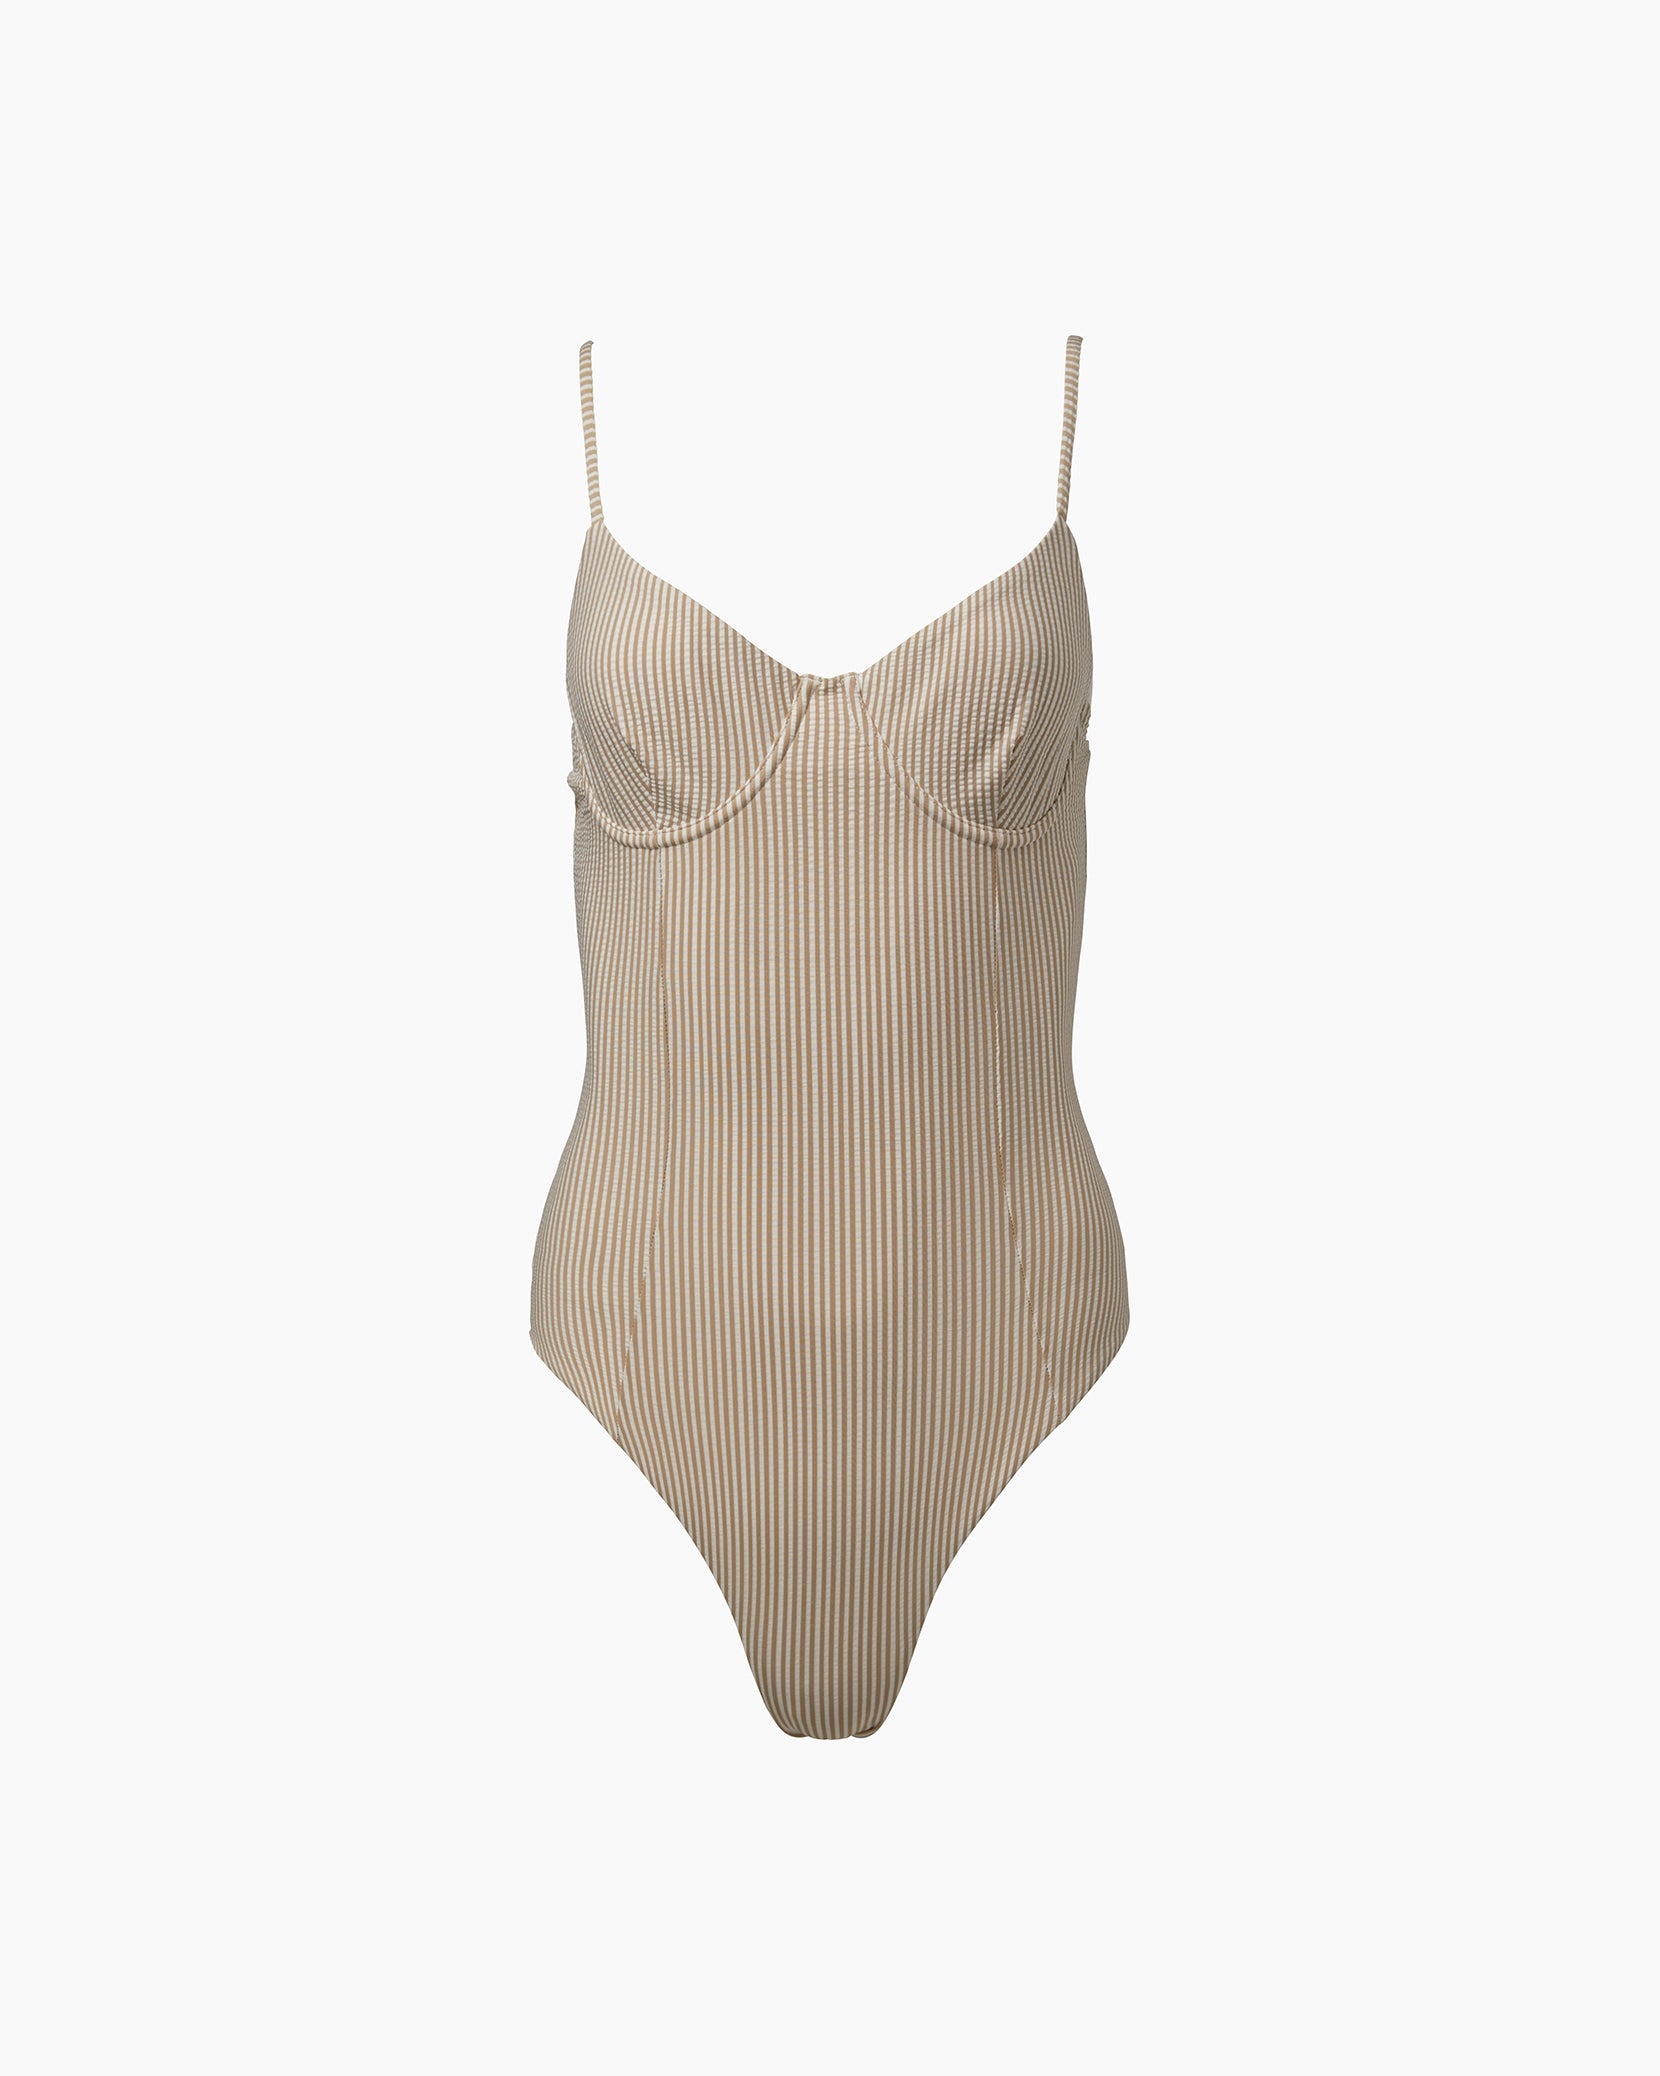 Titika Cut Out Back One Piece Bathing Suit S buy in United States with free  shipping CosmoStore